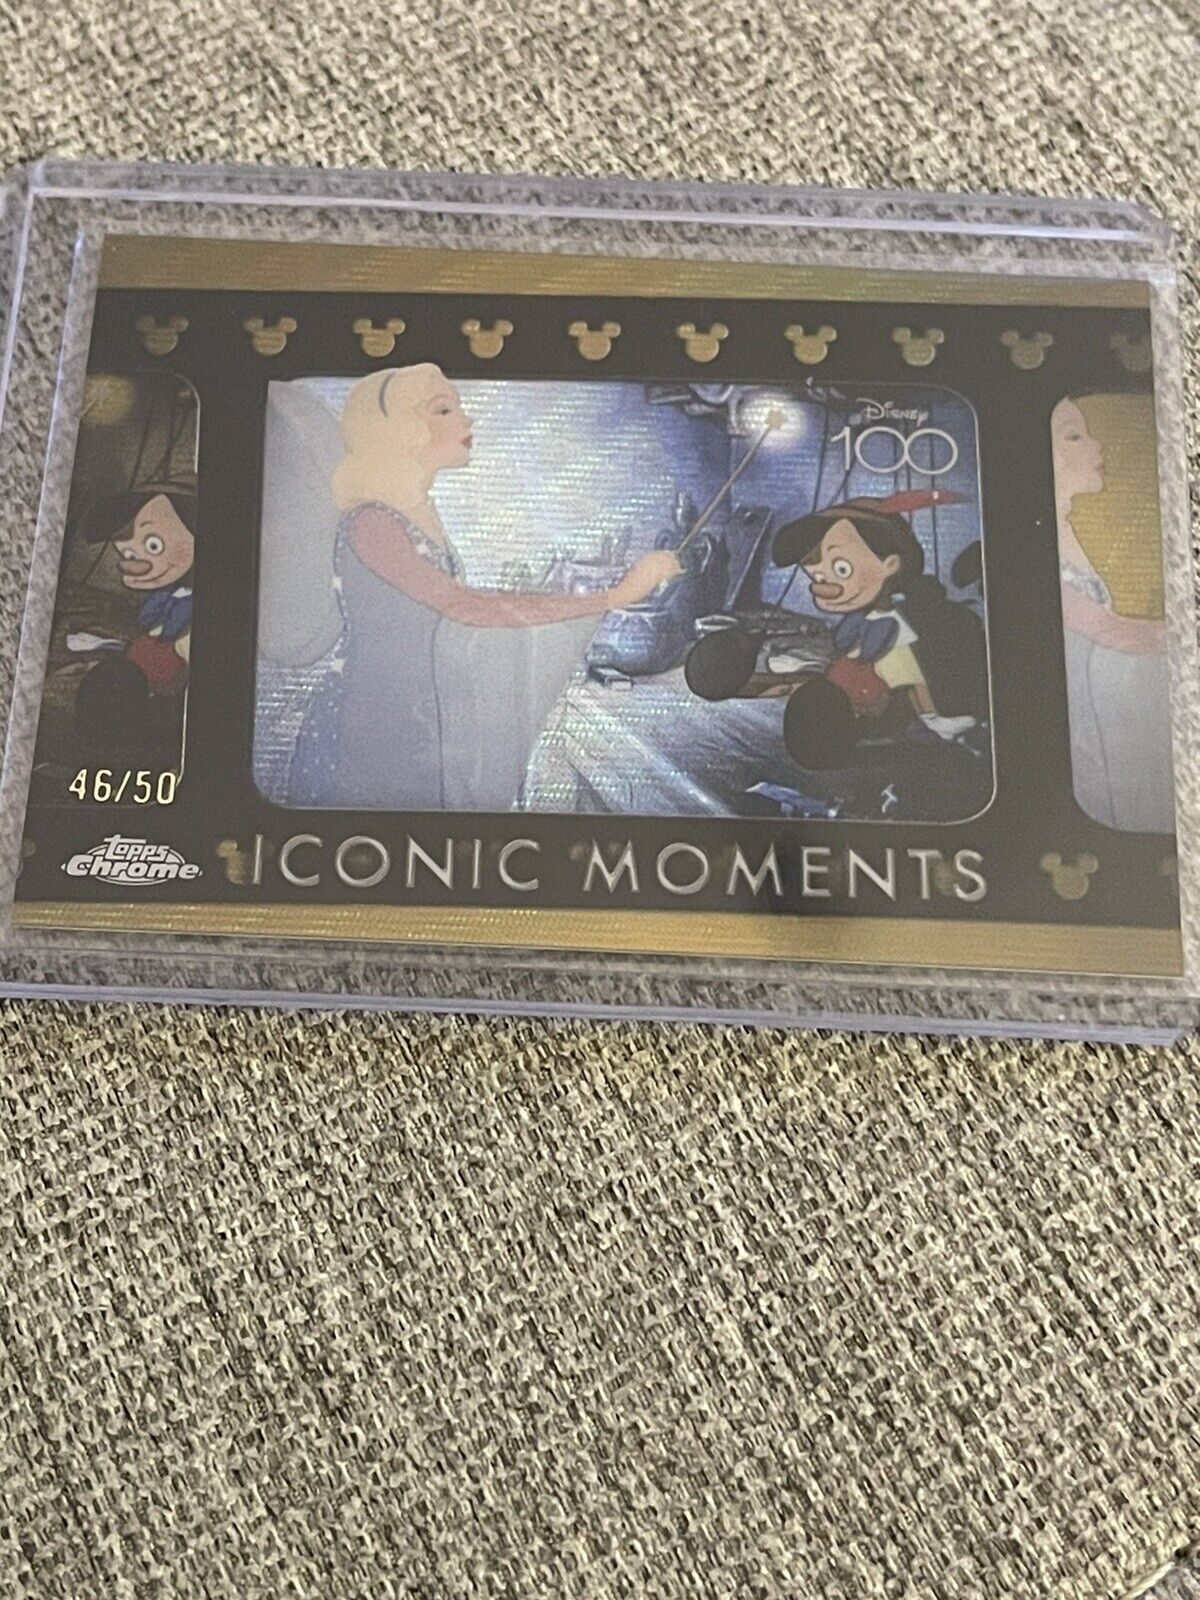 Topps Chrome Disney 100 Iconic Moments Gold Pinocchio I’m A Real Boy Card 46/50